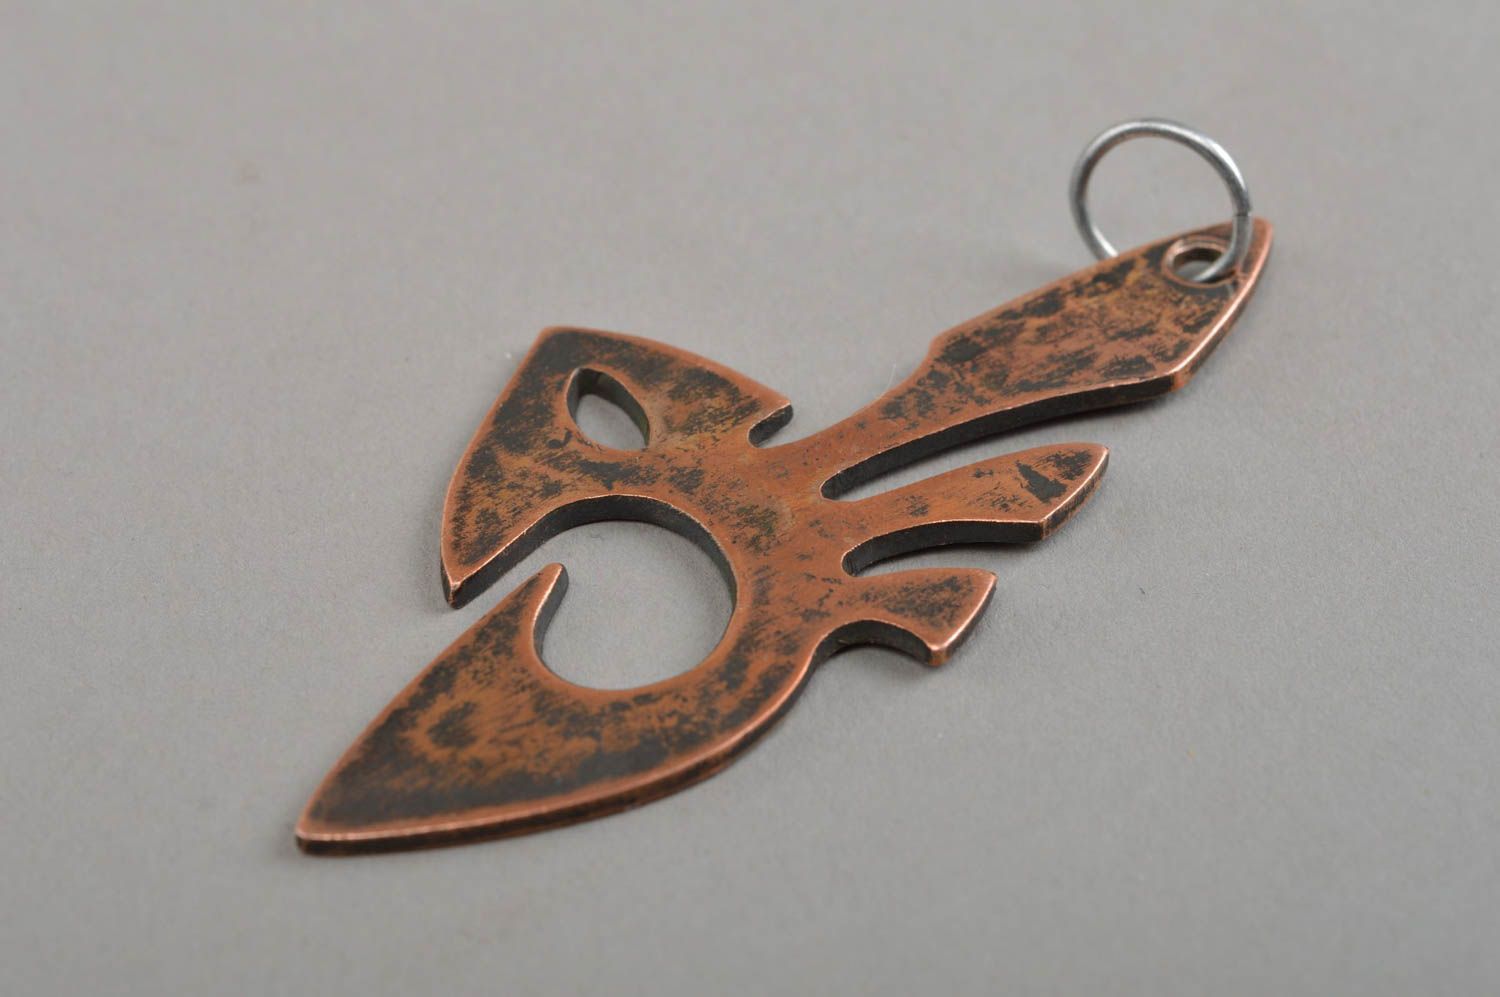 Handmade pendant in shape of fish made of copper on lace stylish accessory  photo 5